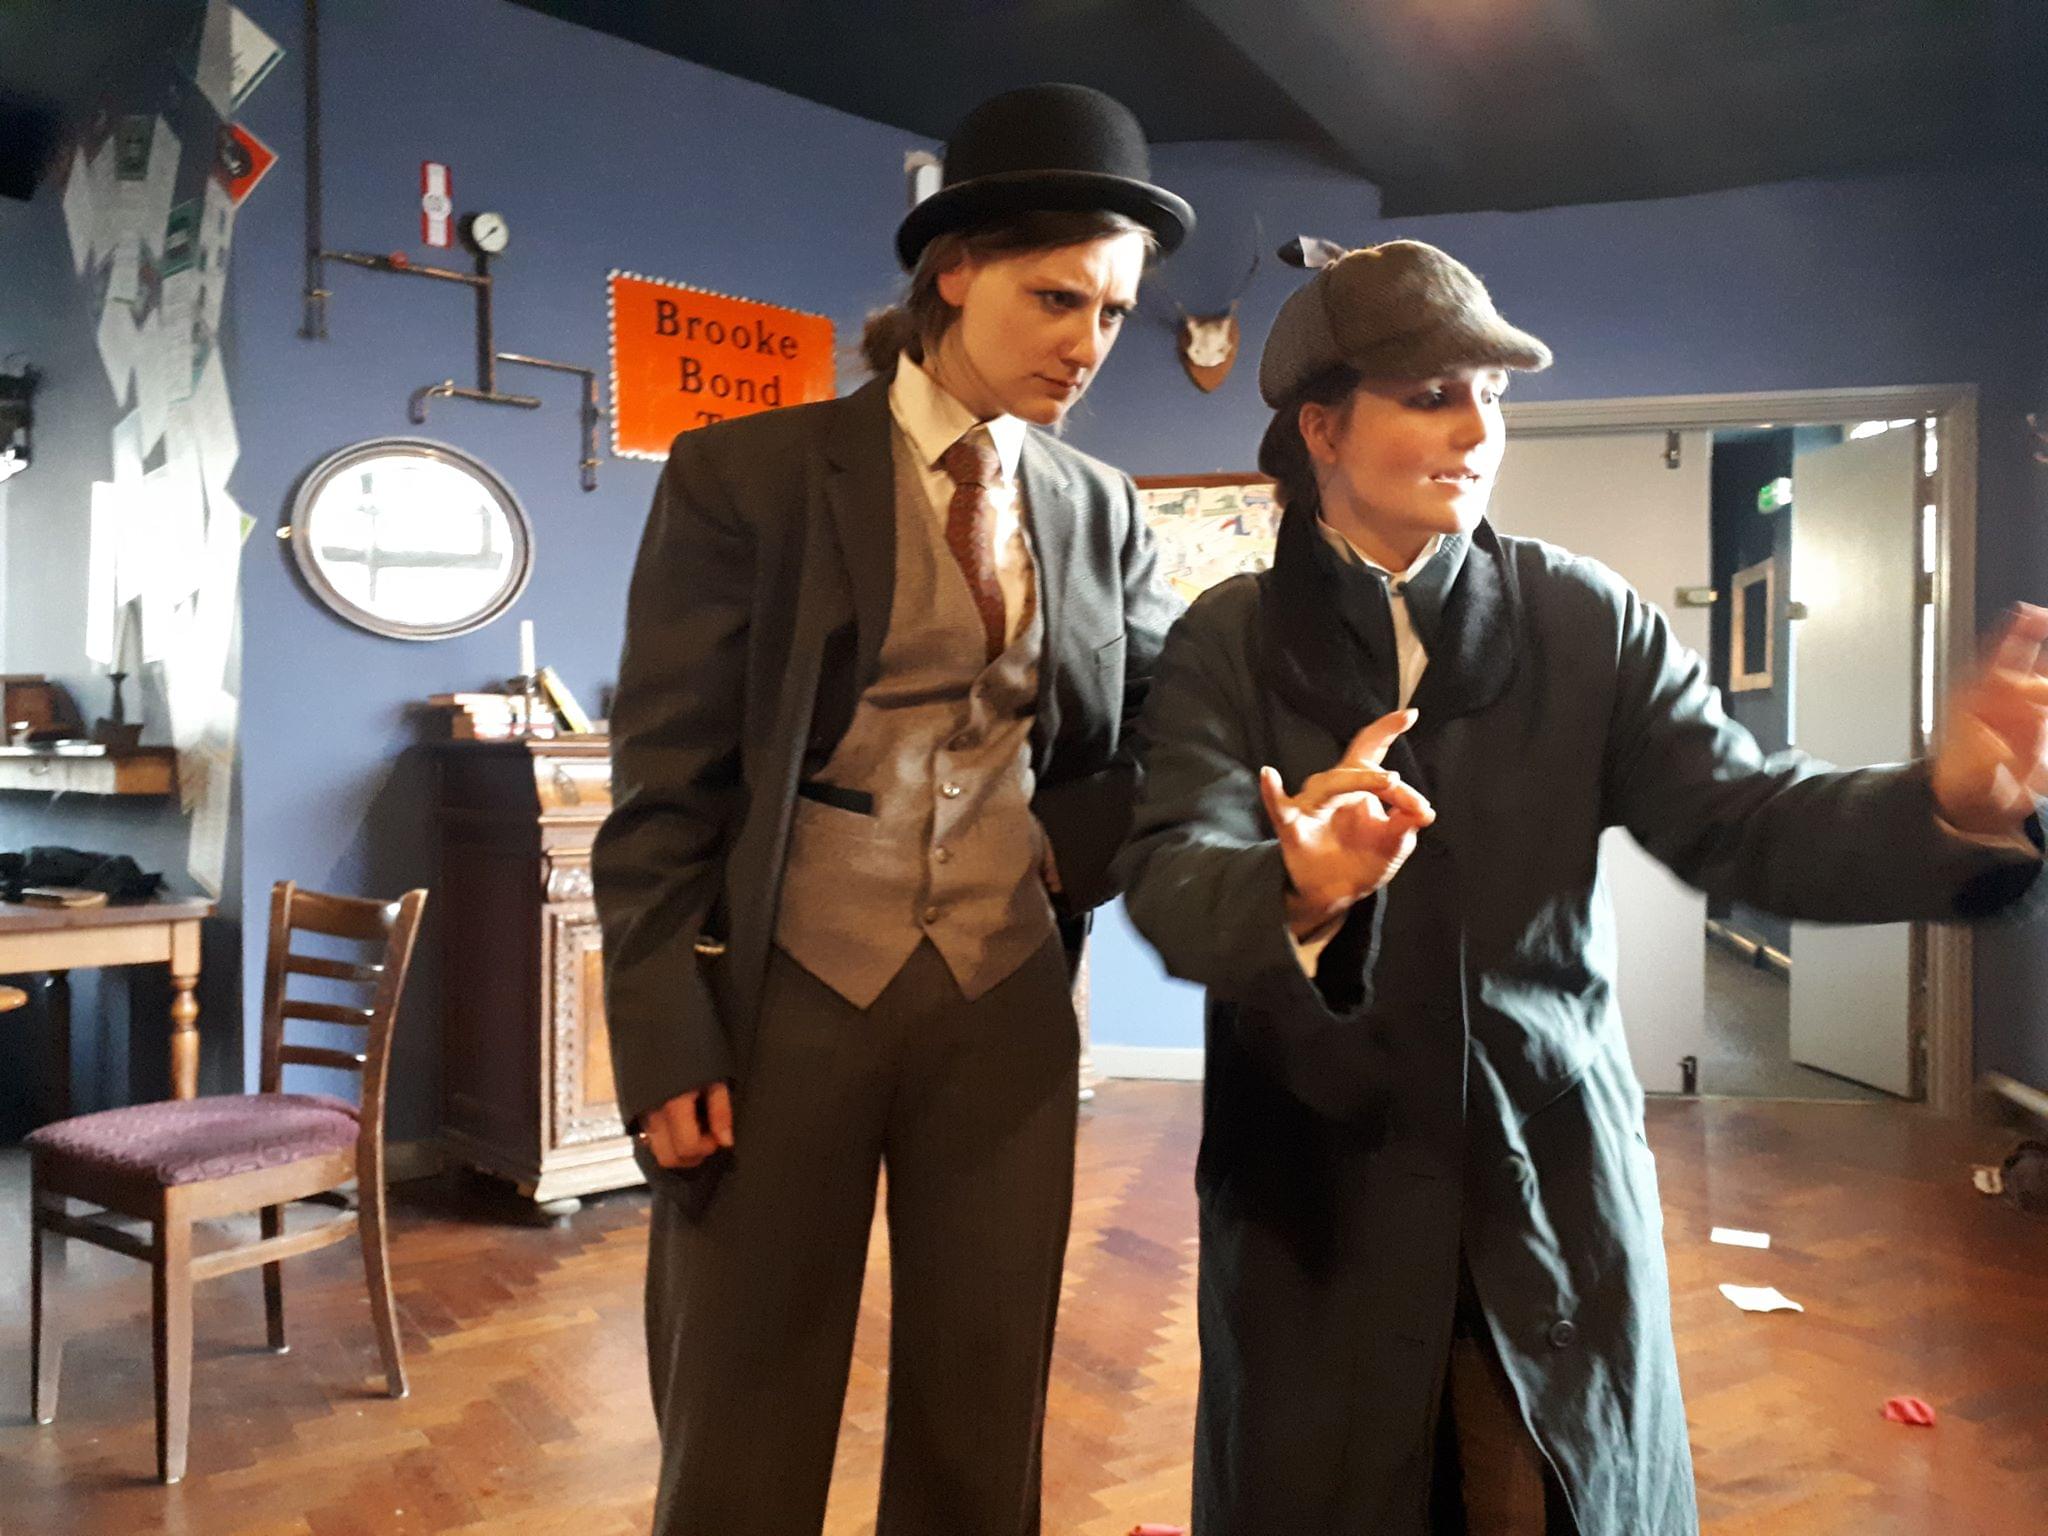 Sophie Milnes and Jasmine Atkins-Smart, rehearsing for The Accidental Adventures of Sherlock Holmes